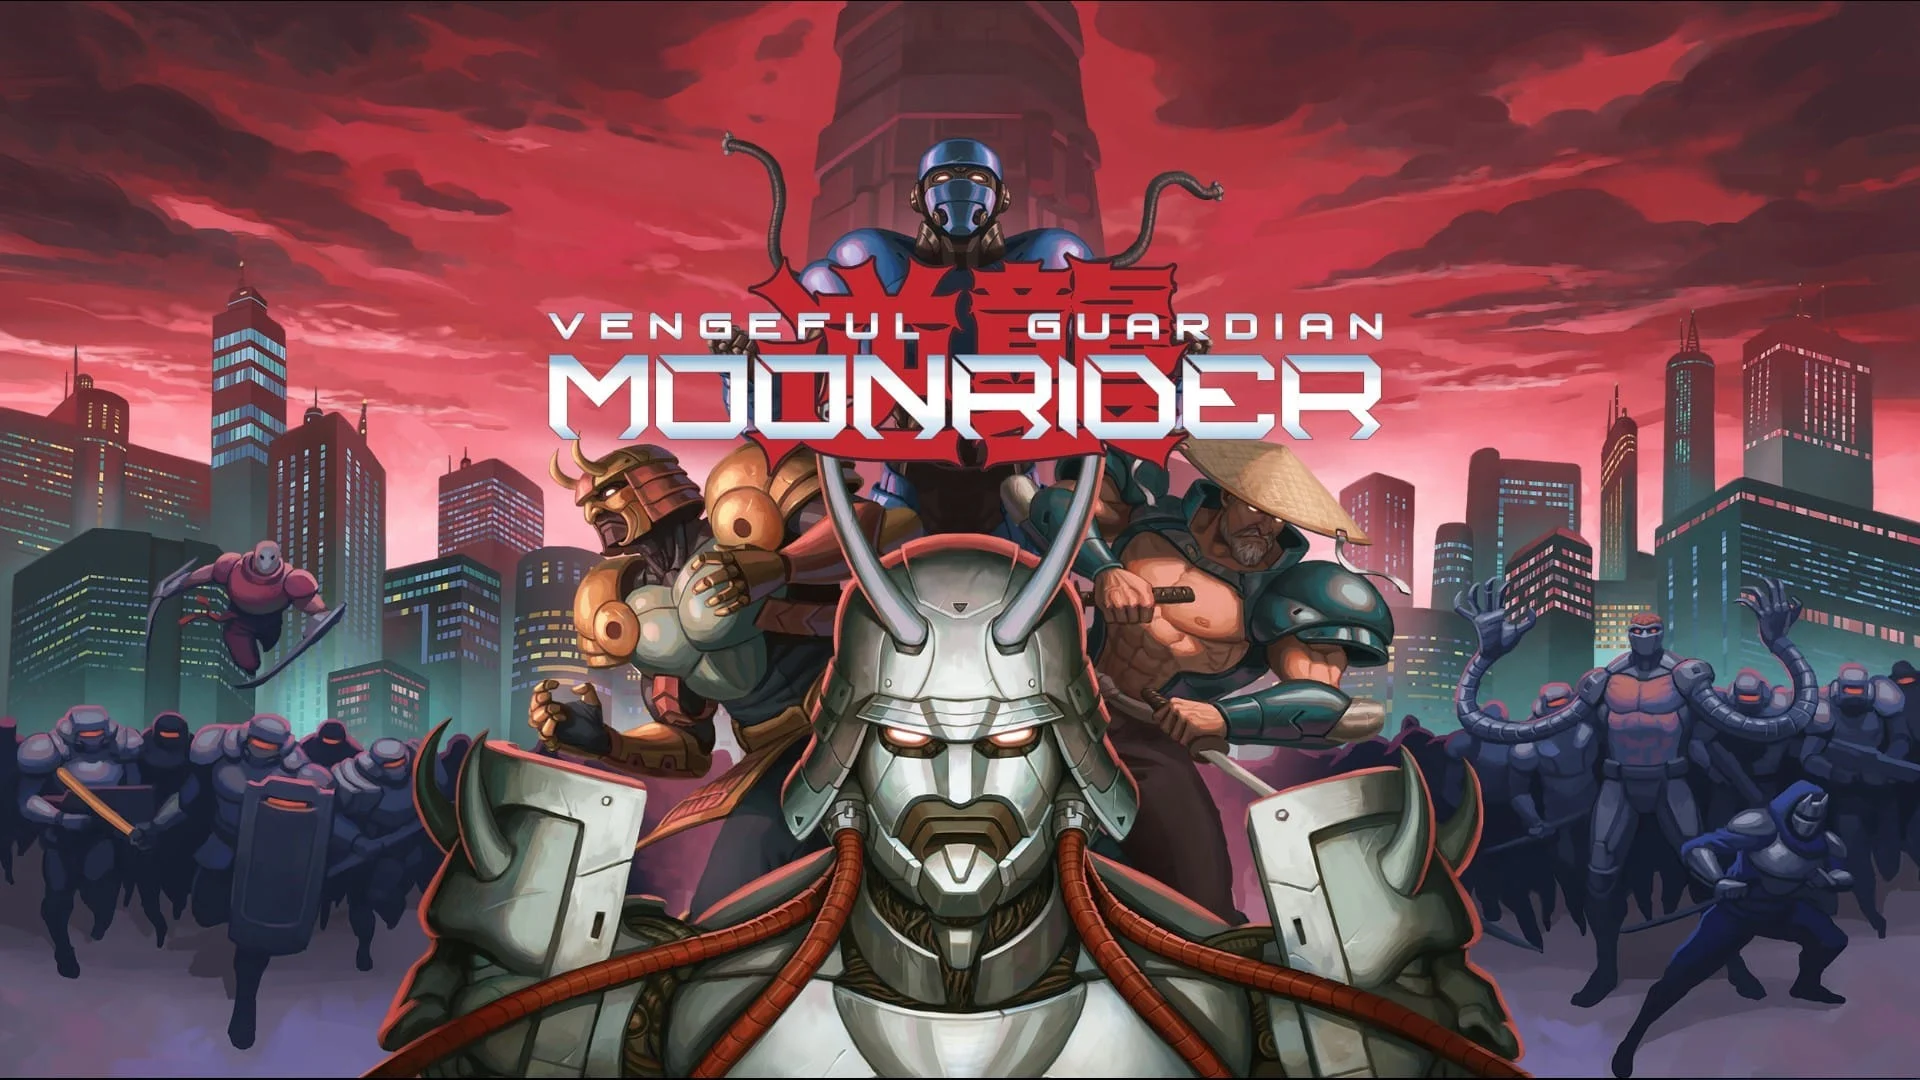 Vengeful Guardian: Moonrider metes out justice to evildoers on PC and  consoles - Gaming Age